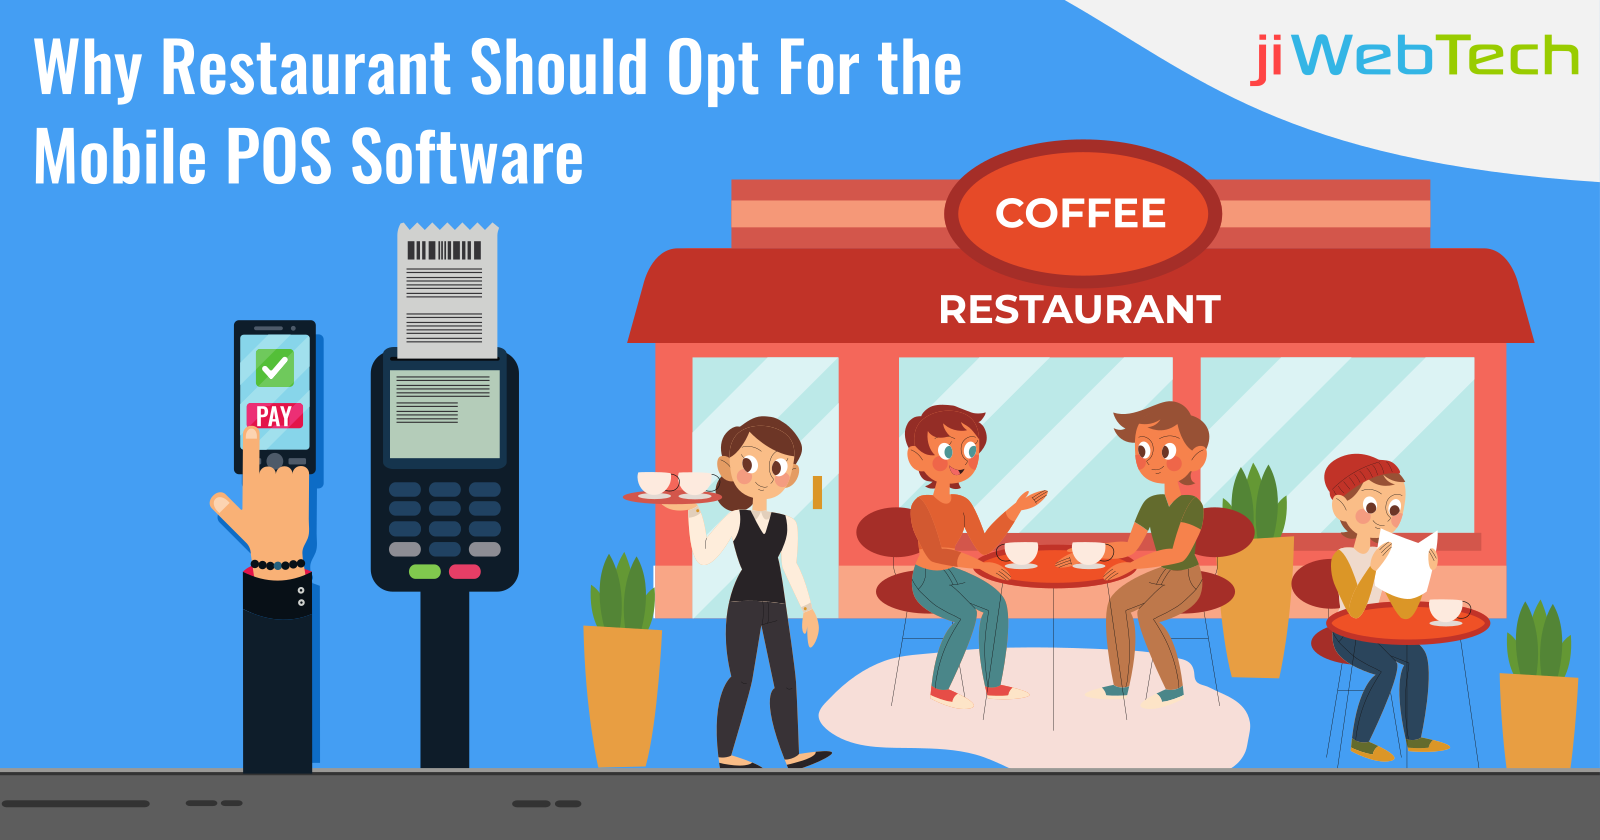 Why Restaurant Should Opt For the Mobile POS Software